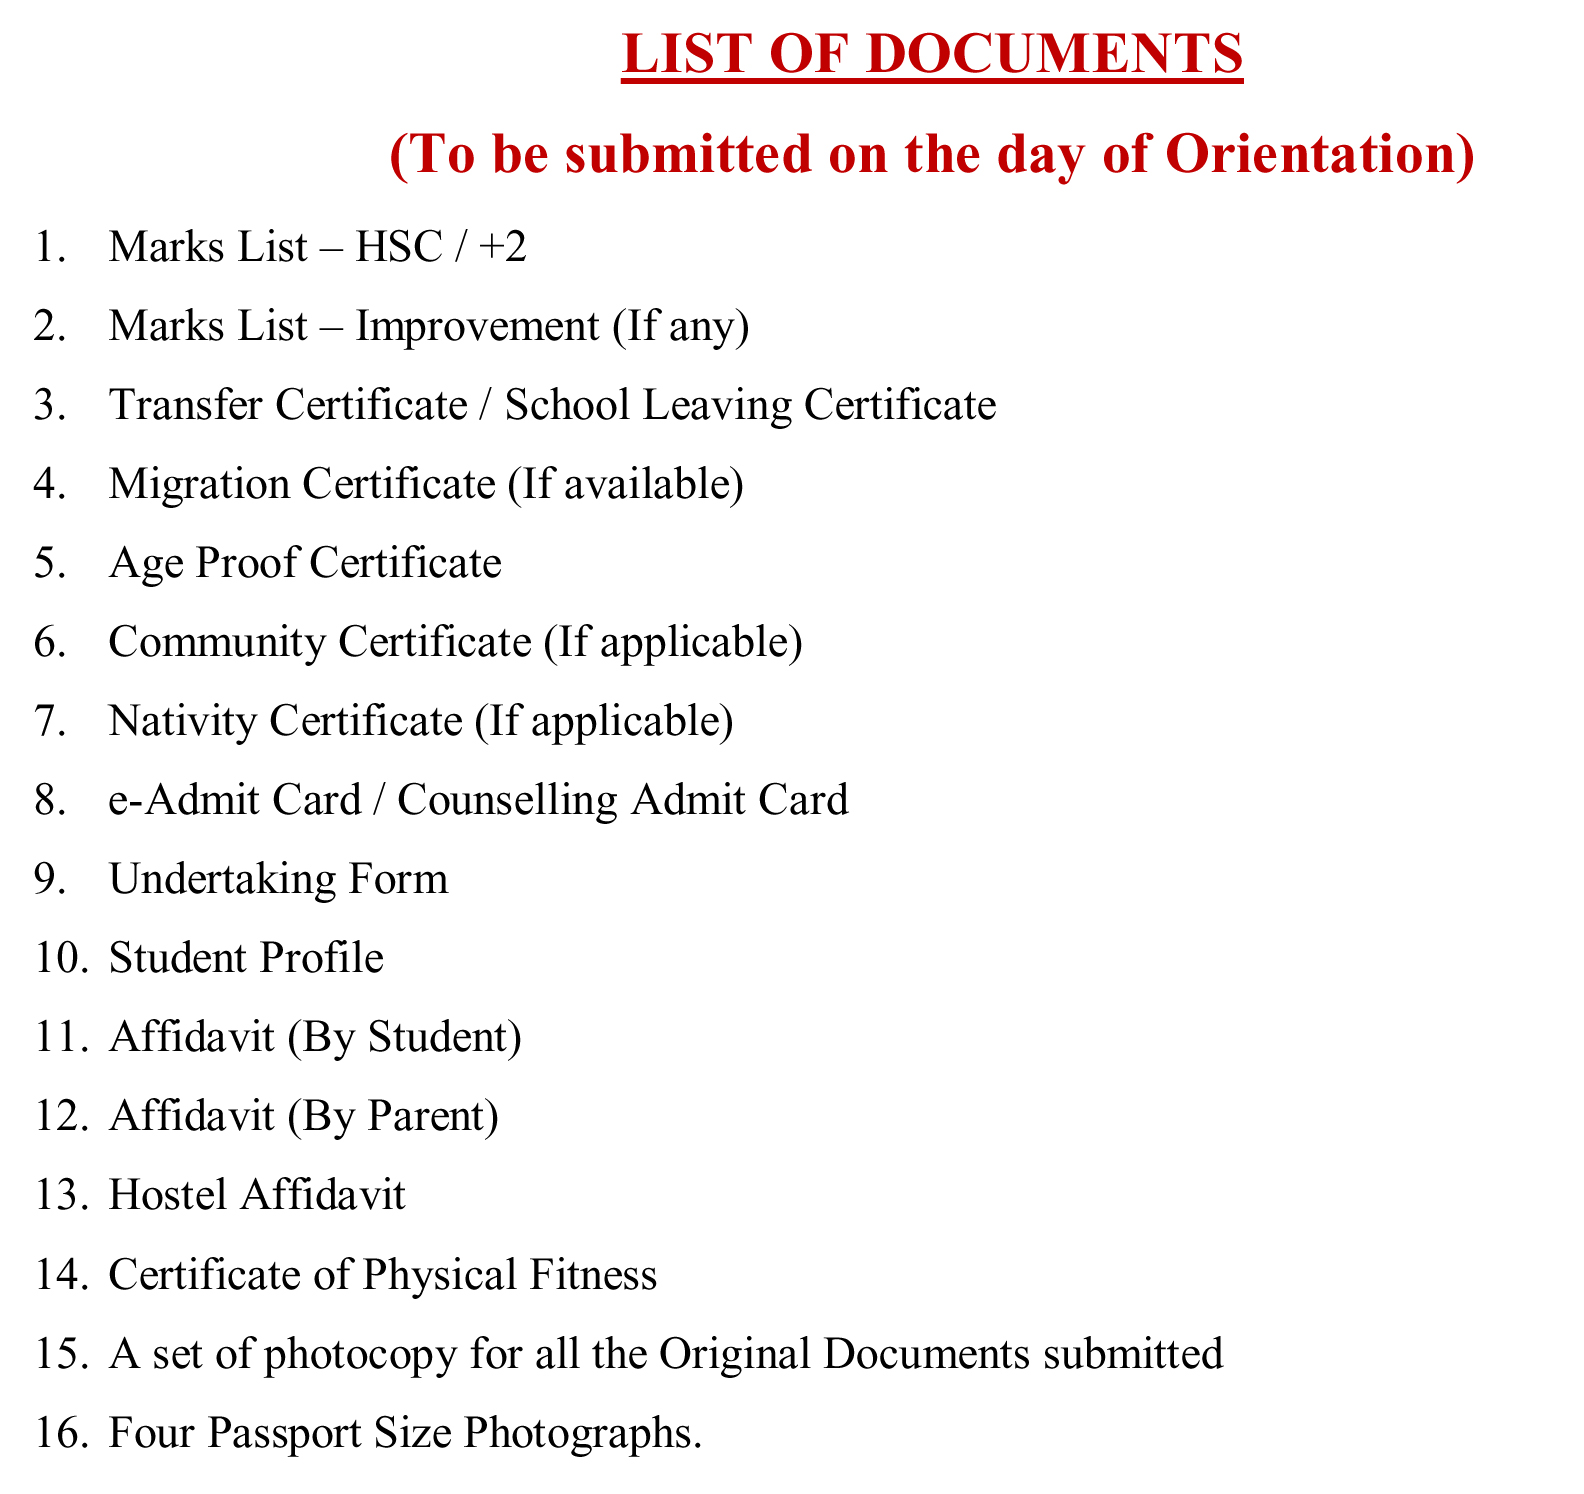 List-of-Documents